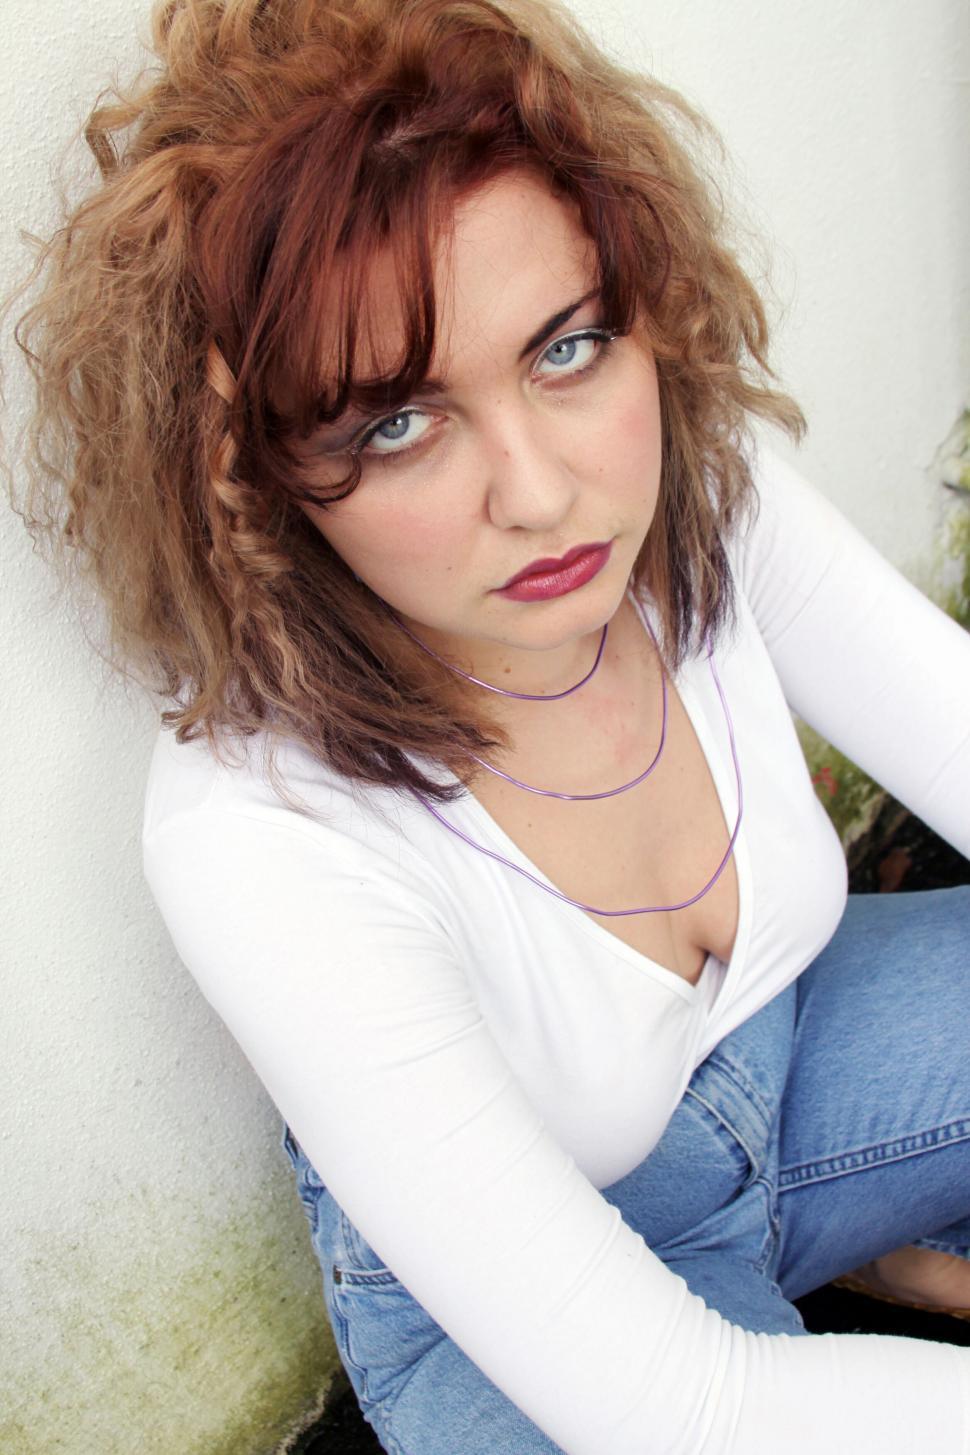 Free Image of Serious woman with piercing gaze in white top 